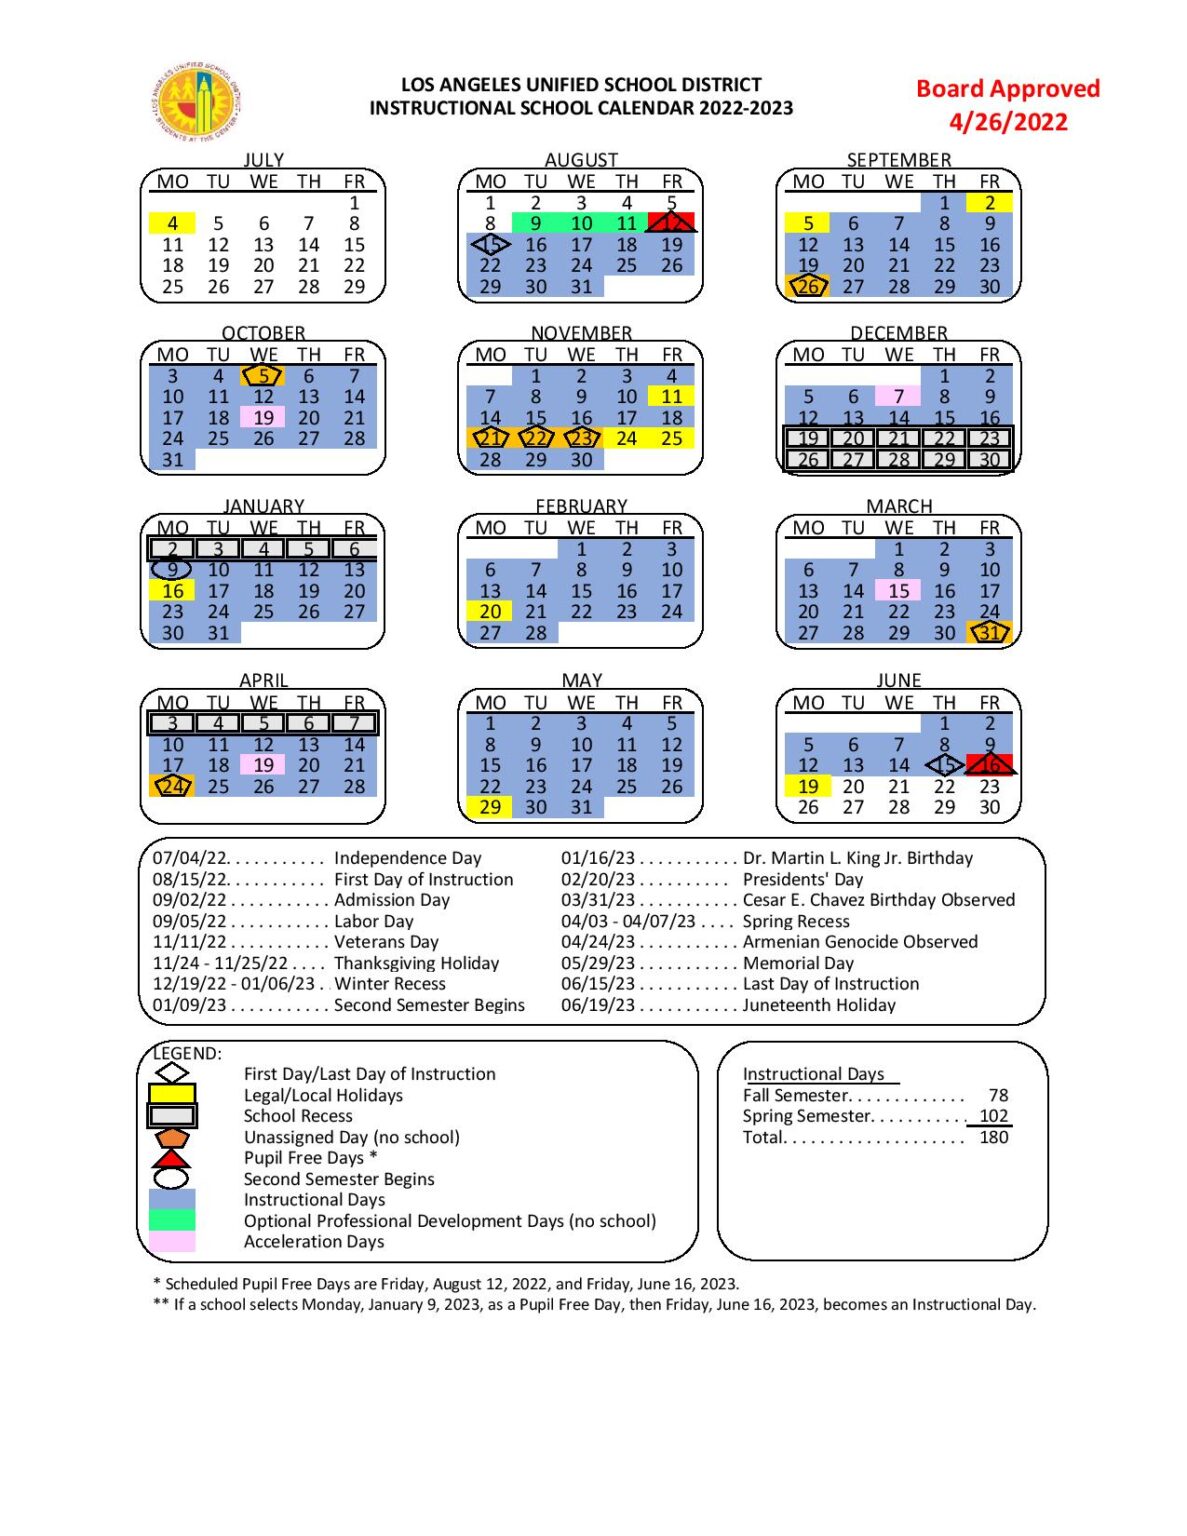 Los Angeles Unified School District Calendar Holidays 2022-2023 ...